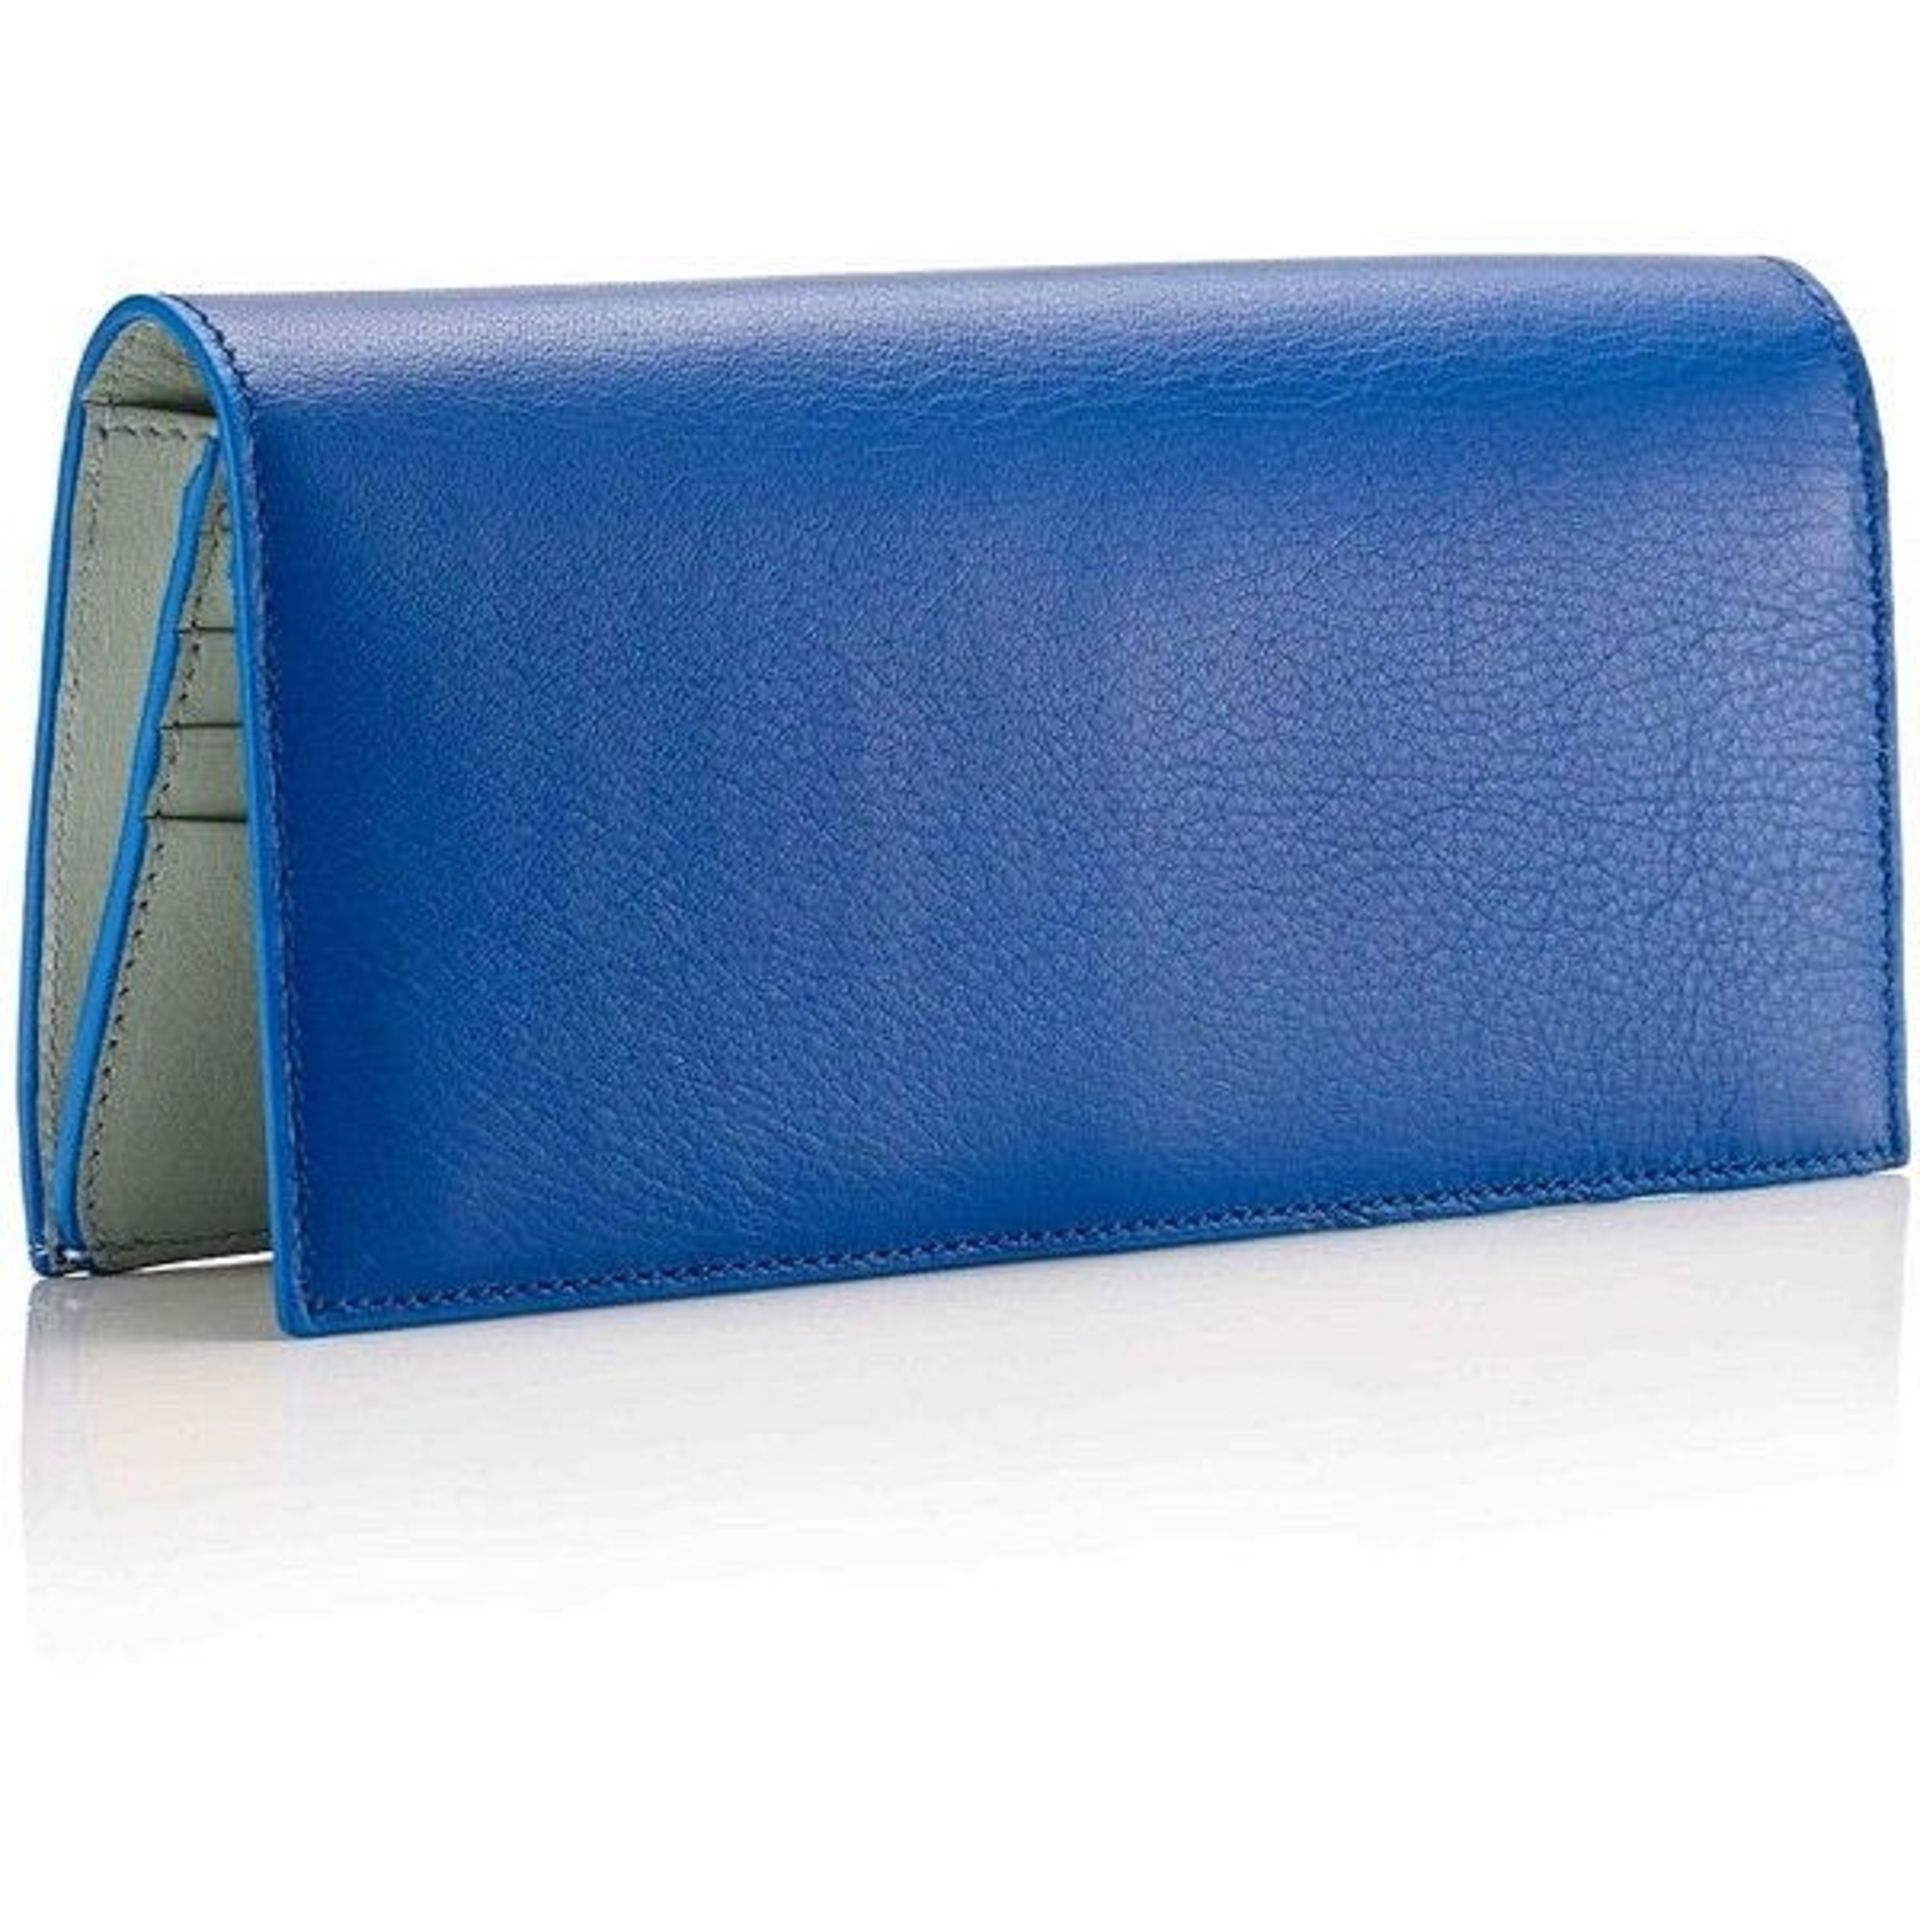 LONG TRAVEL WALLET LONG TRAVEL WALLET TRUE BLUE RRP £195.00 Unmistakable luxury without pretensions,